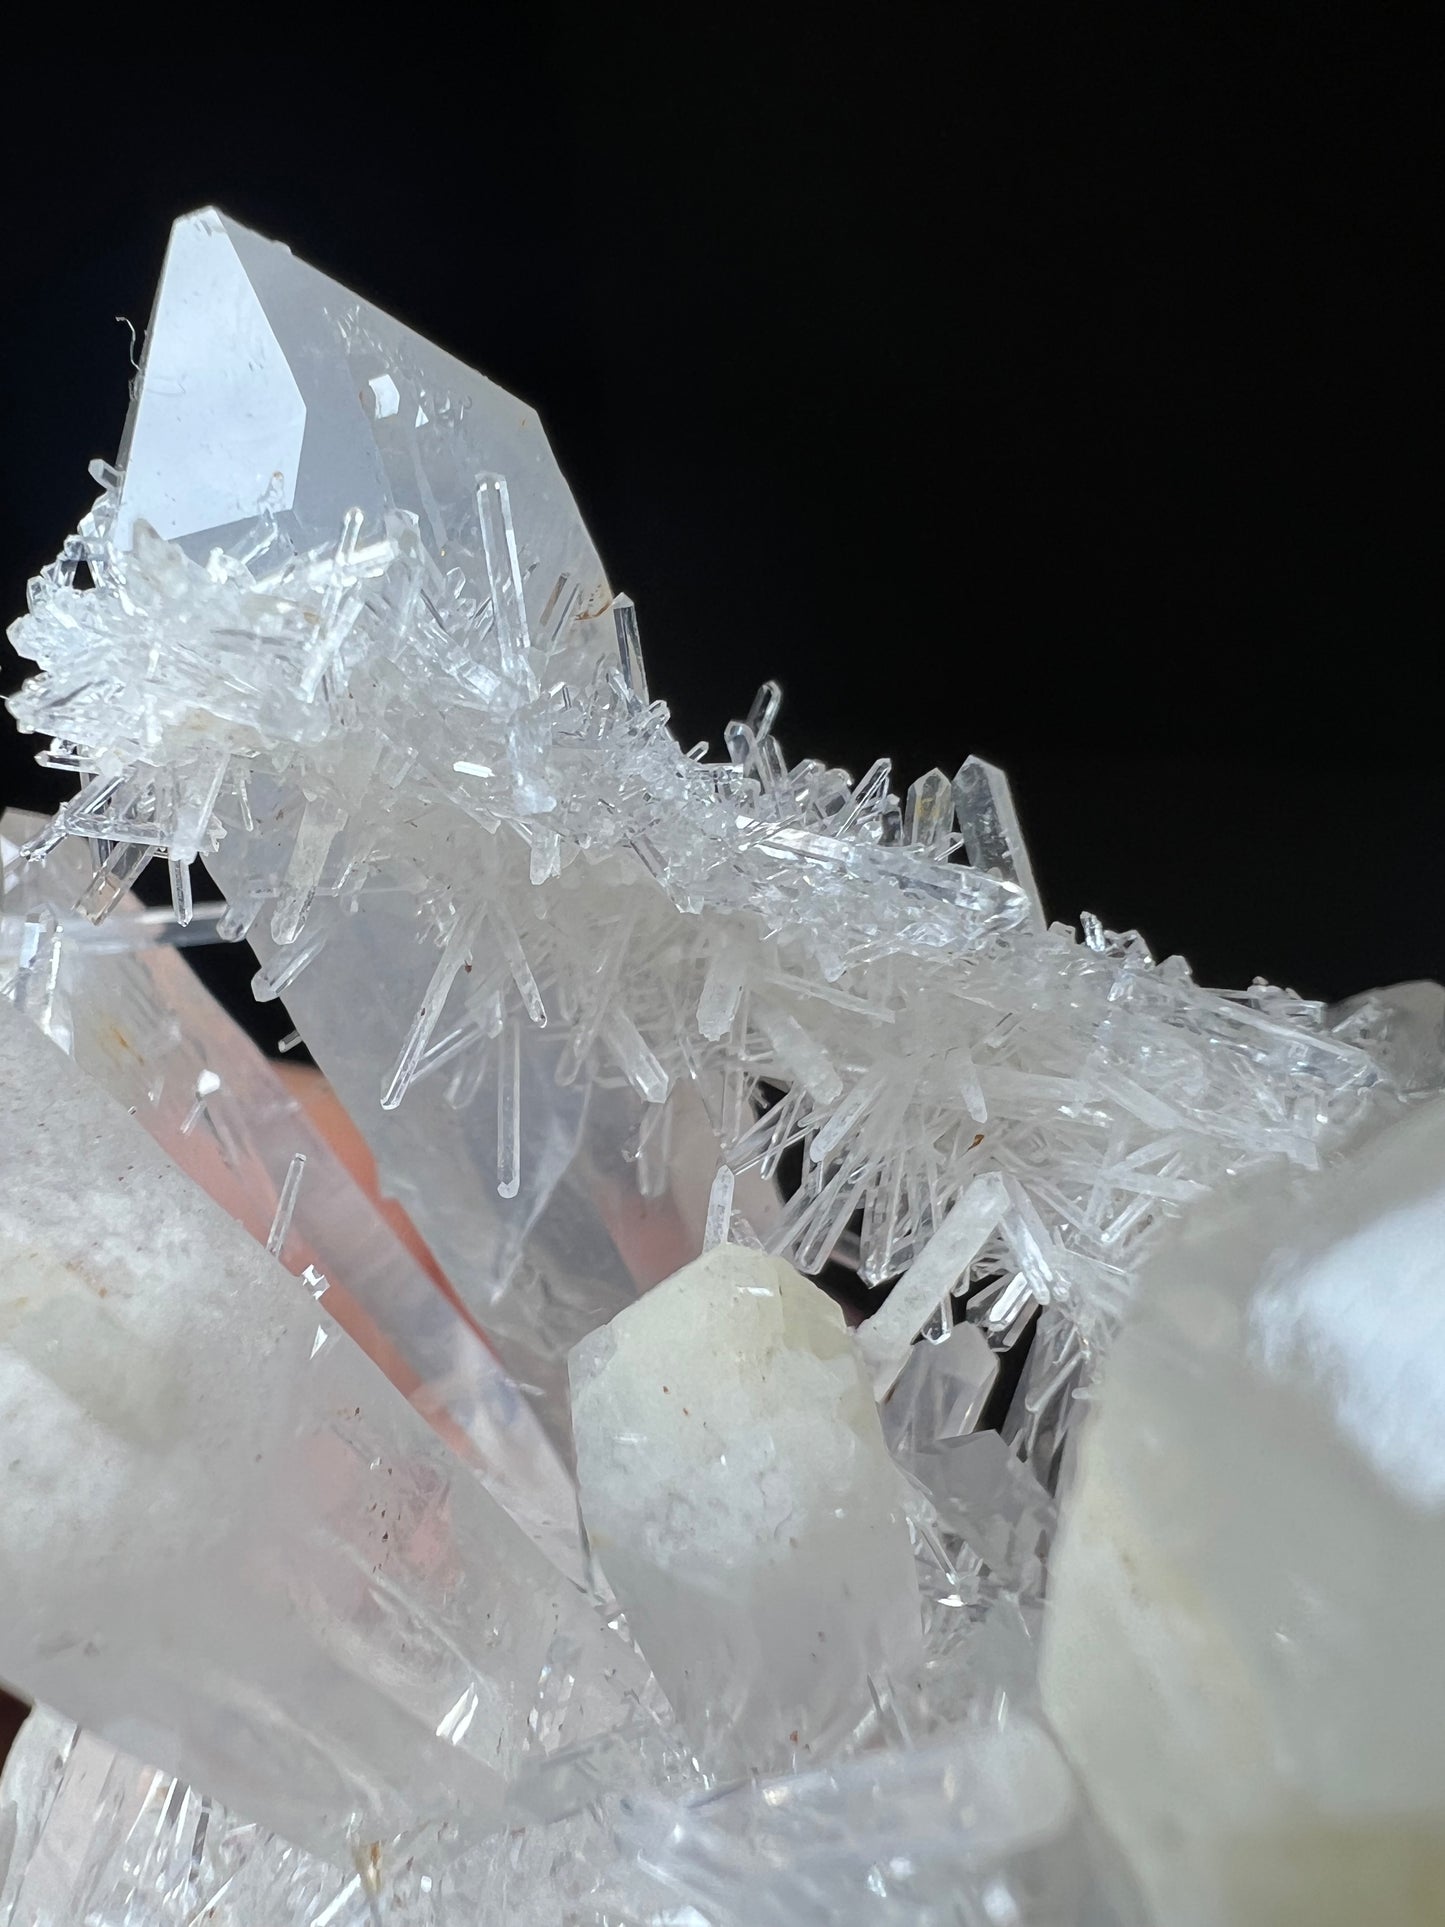 Amazing Formation of a Clear Quartz Cluster From Cabiche, Boyaca, Columbia- Statement Piece, Crystal Healing, Collectors Piece